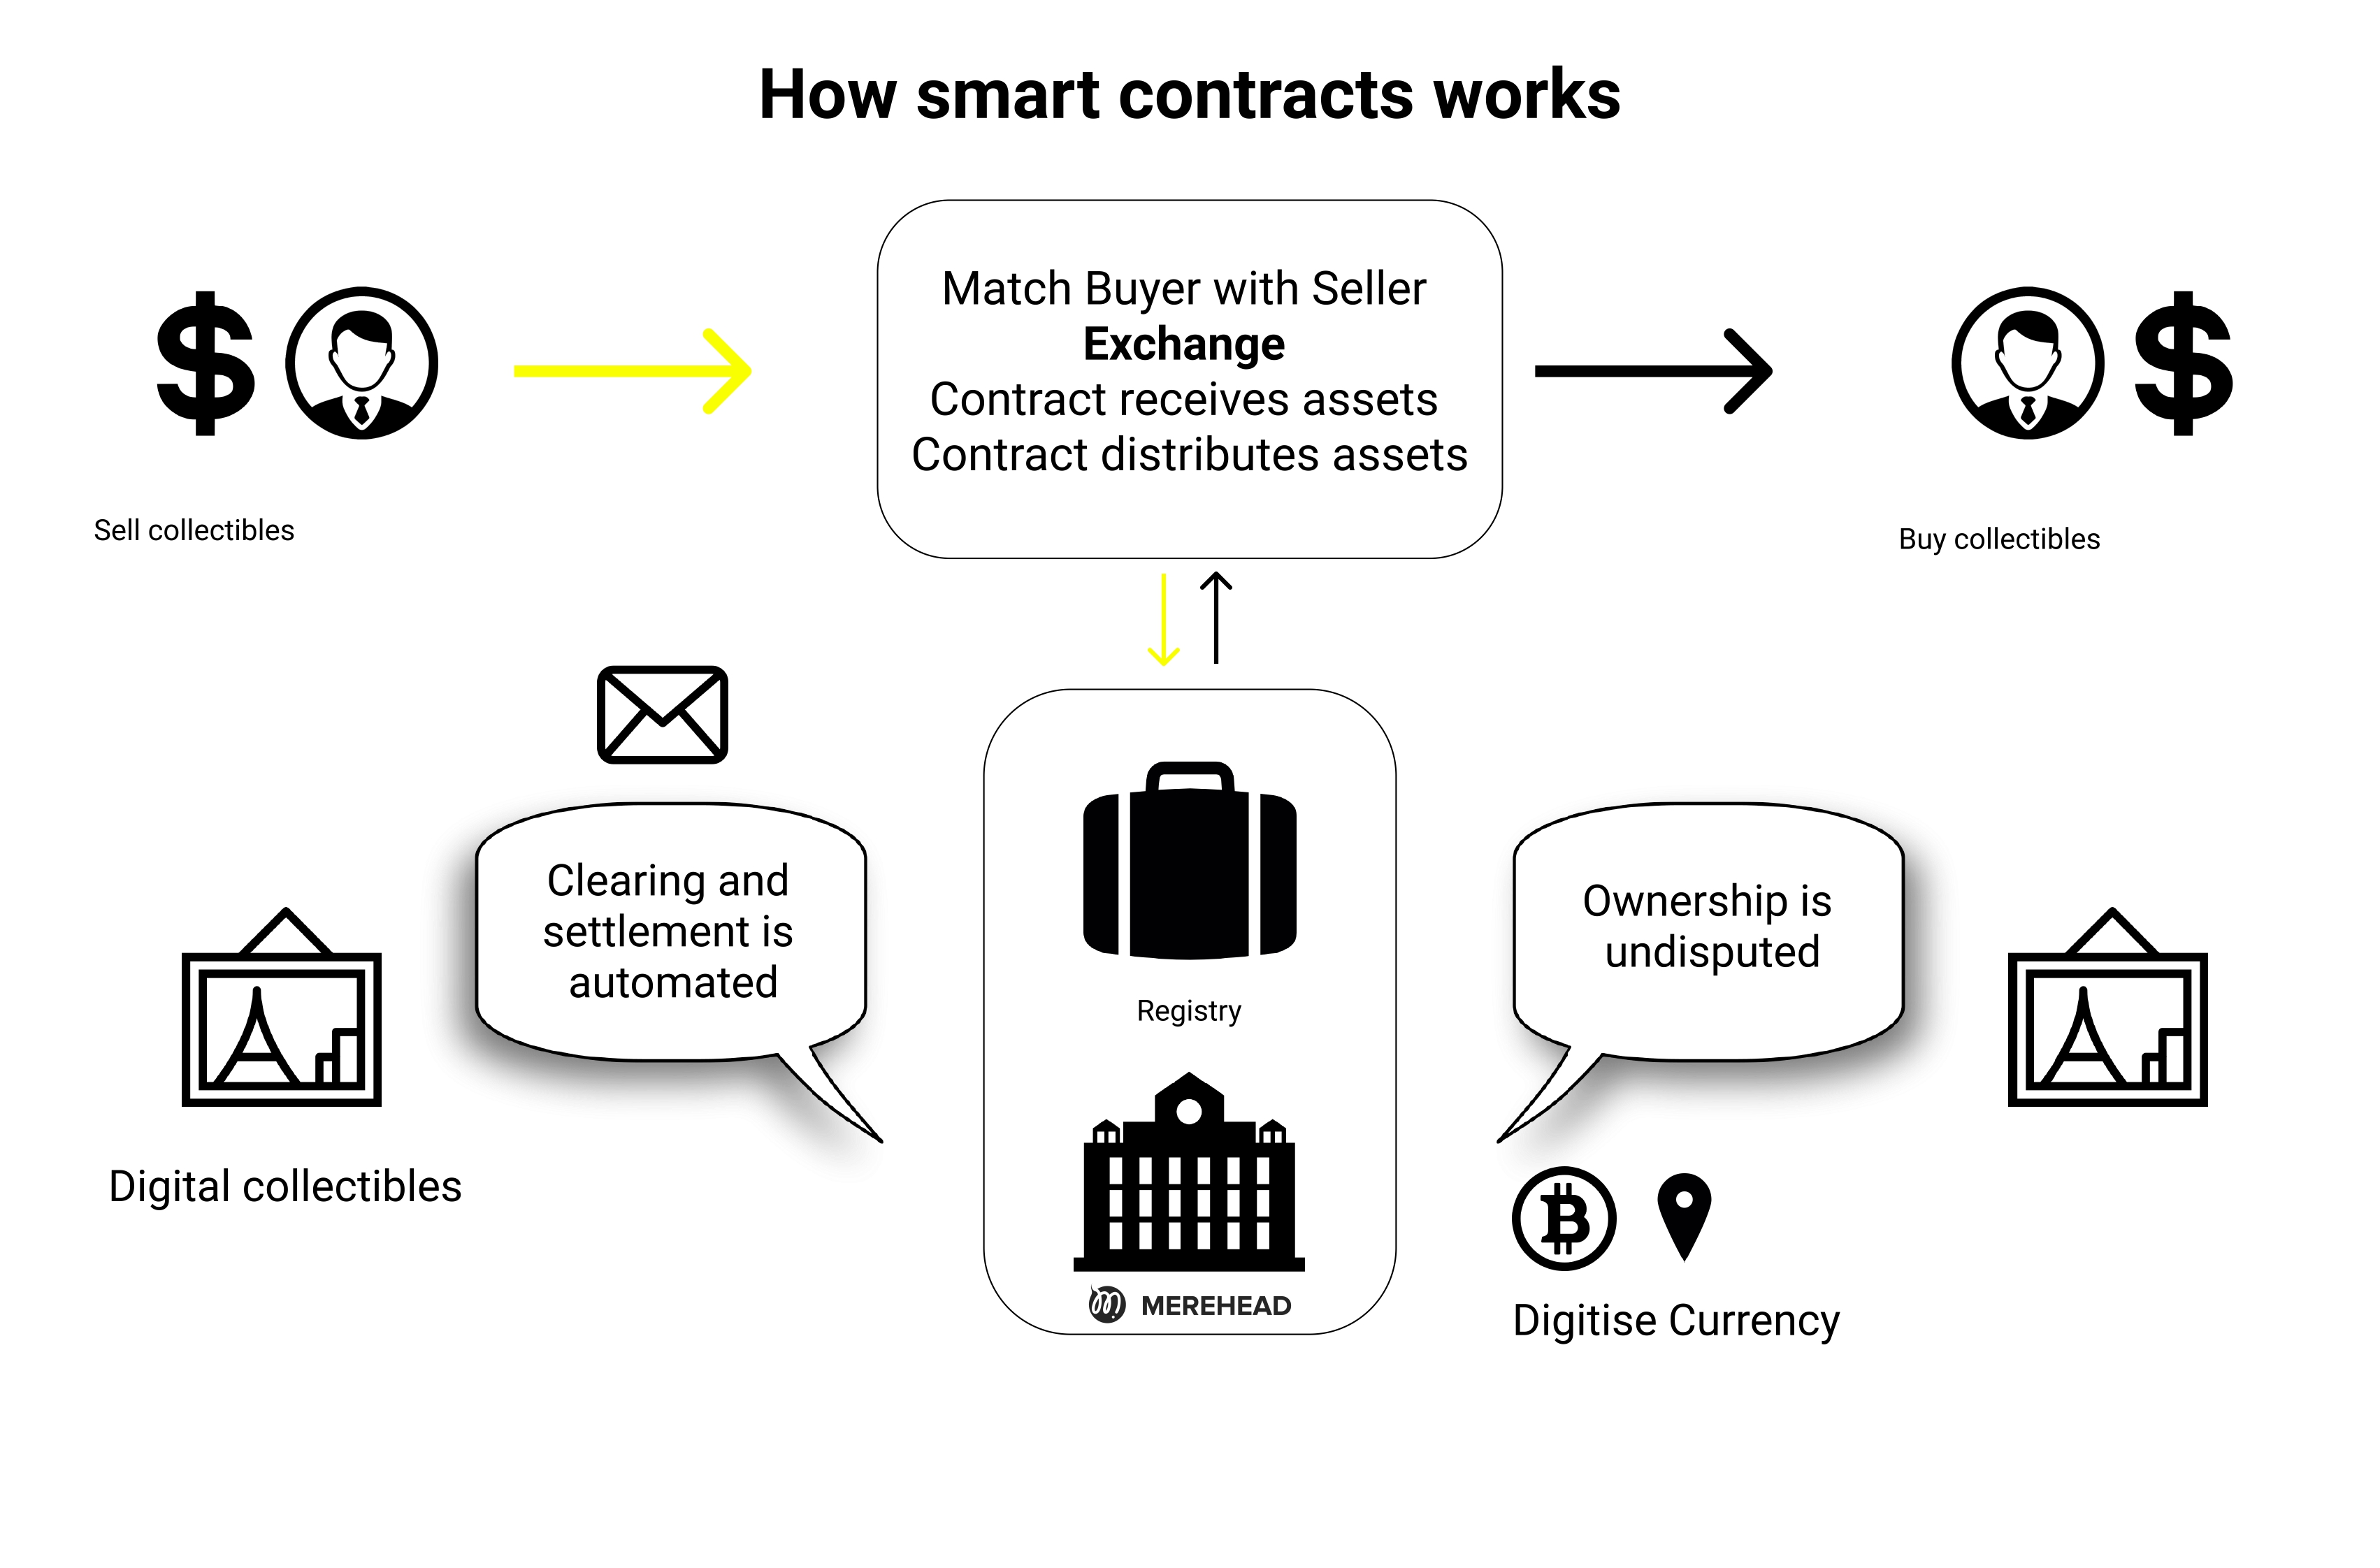 How smart contracts of NFT marketplaces work
Source: https://merehead.com/